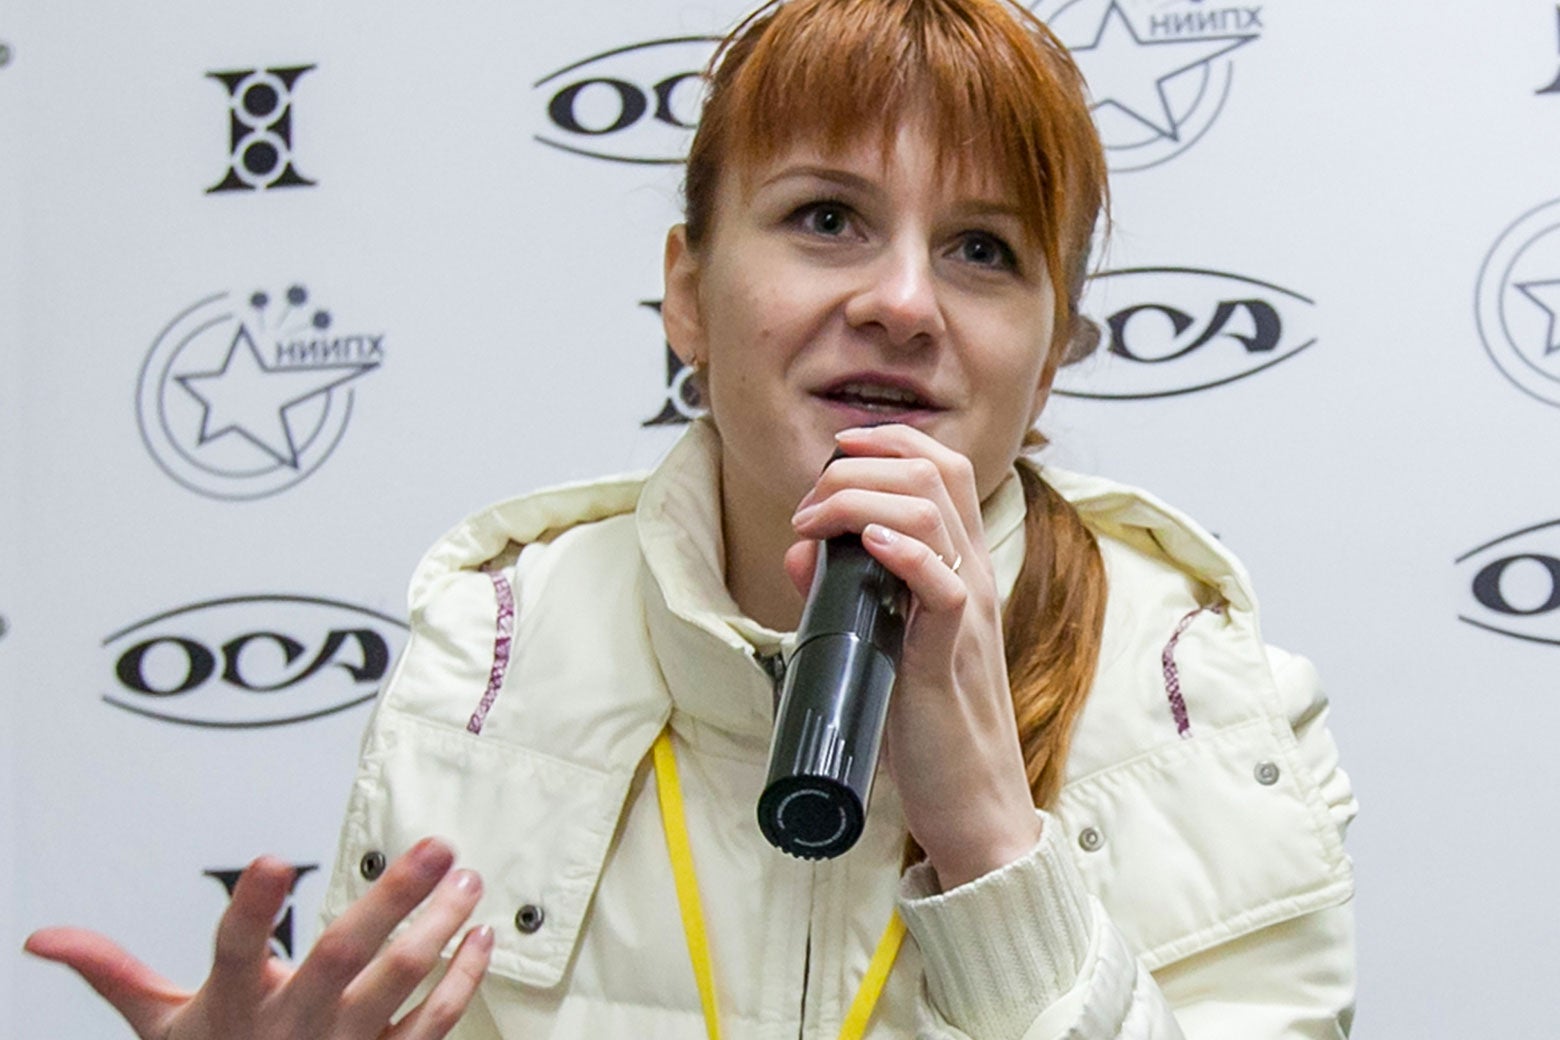 Mariia Butina speaks into a microphone at a press conference.